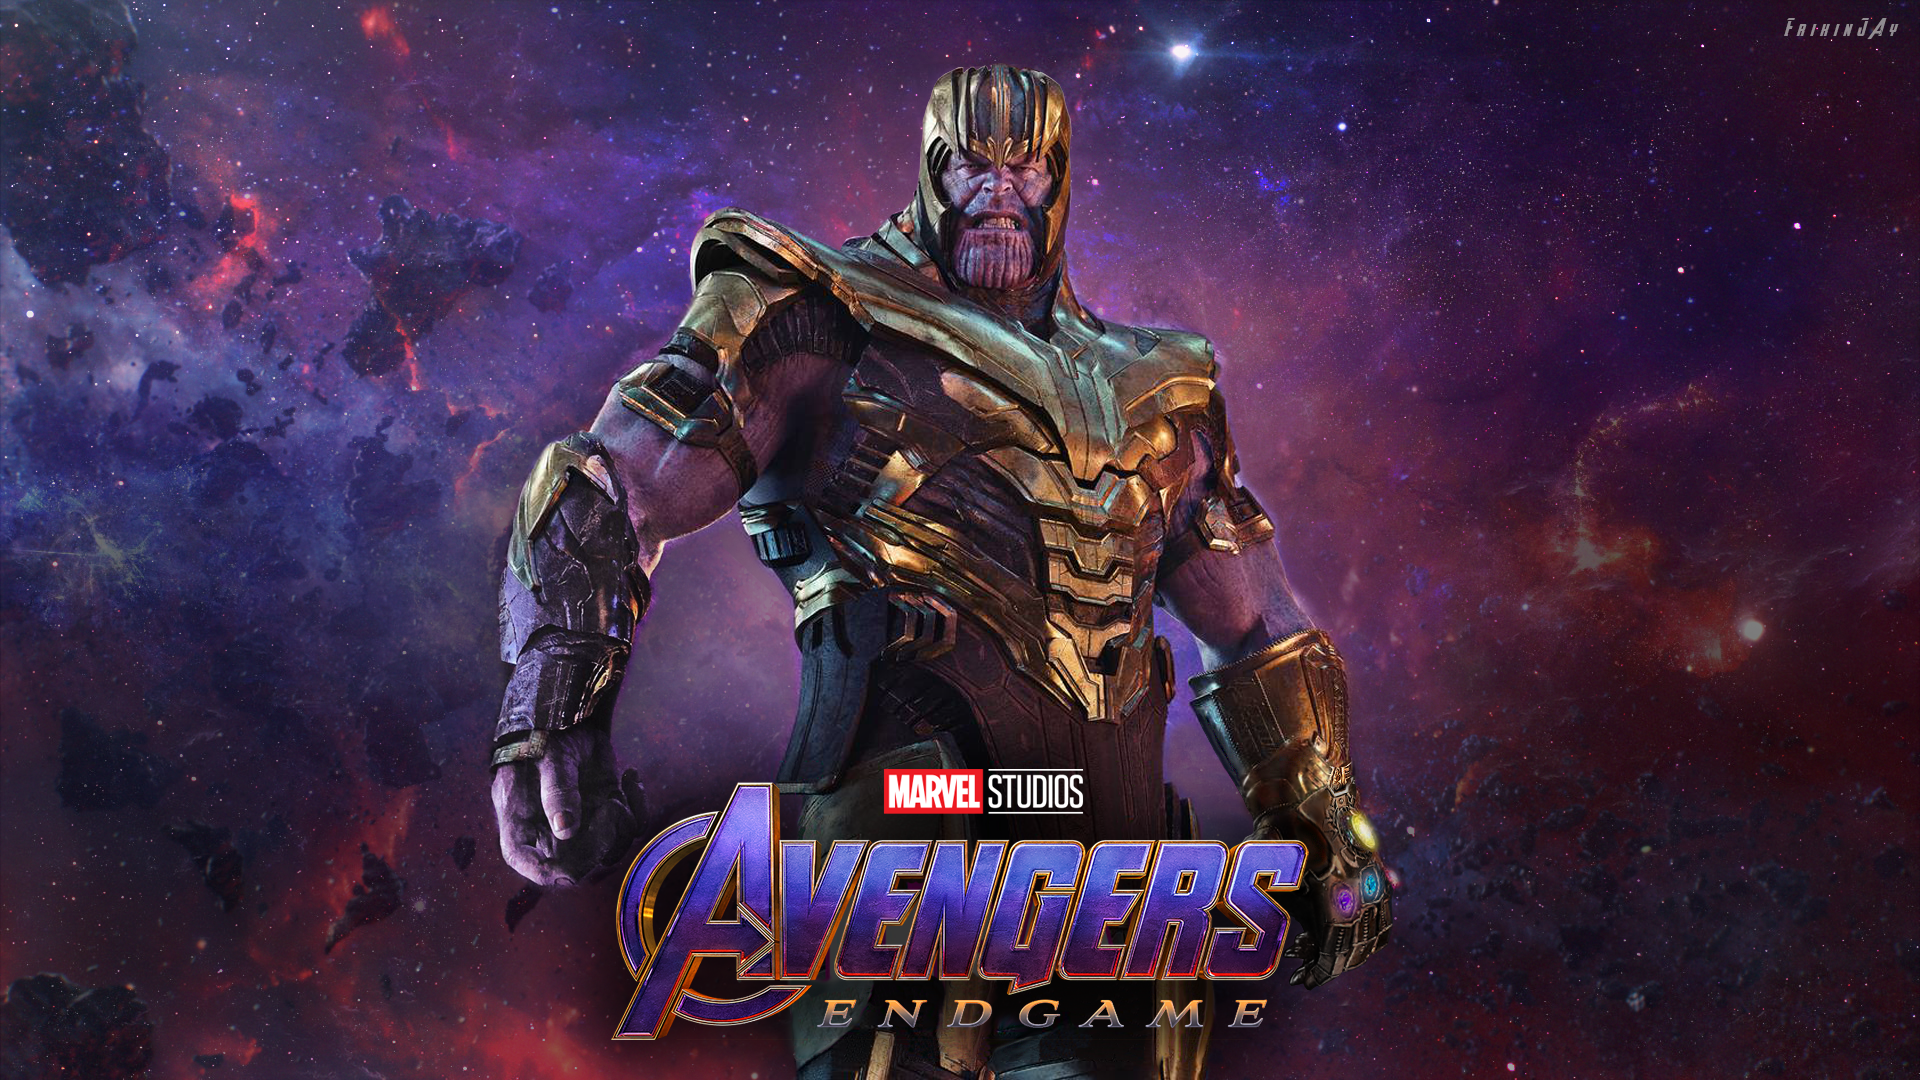 As requested Thanos Wallpaper Need more? let me know